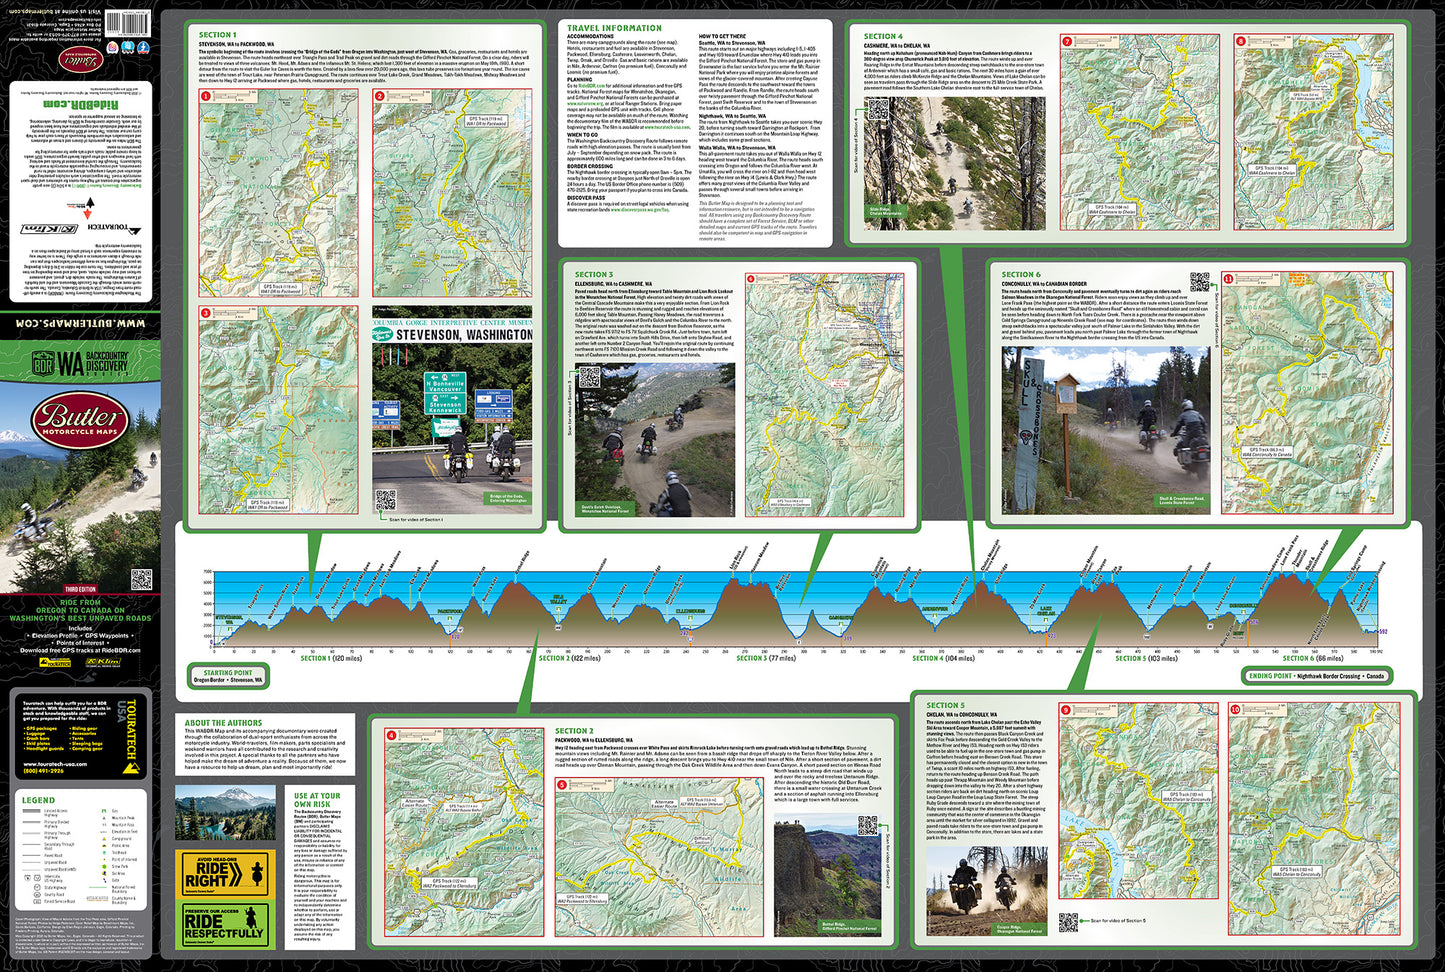 Washington Backcountry Discovery Route (WABDR) Map – V3